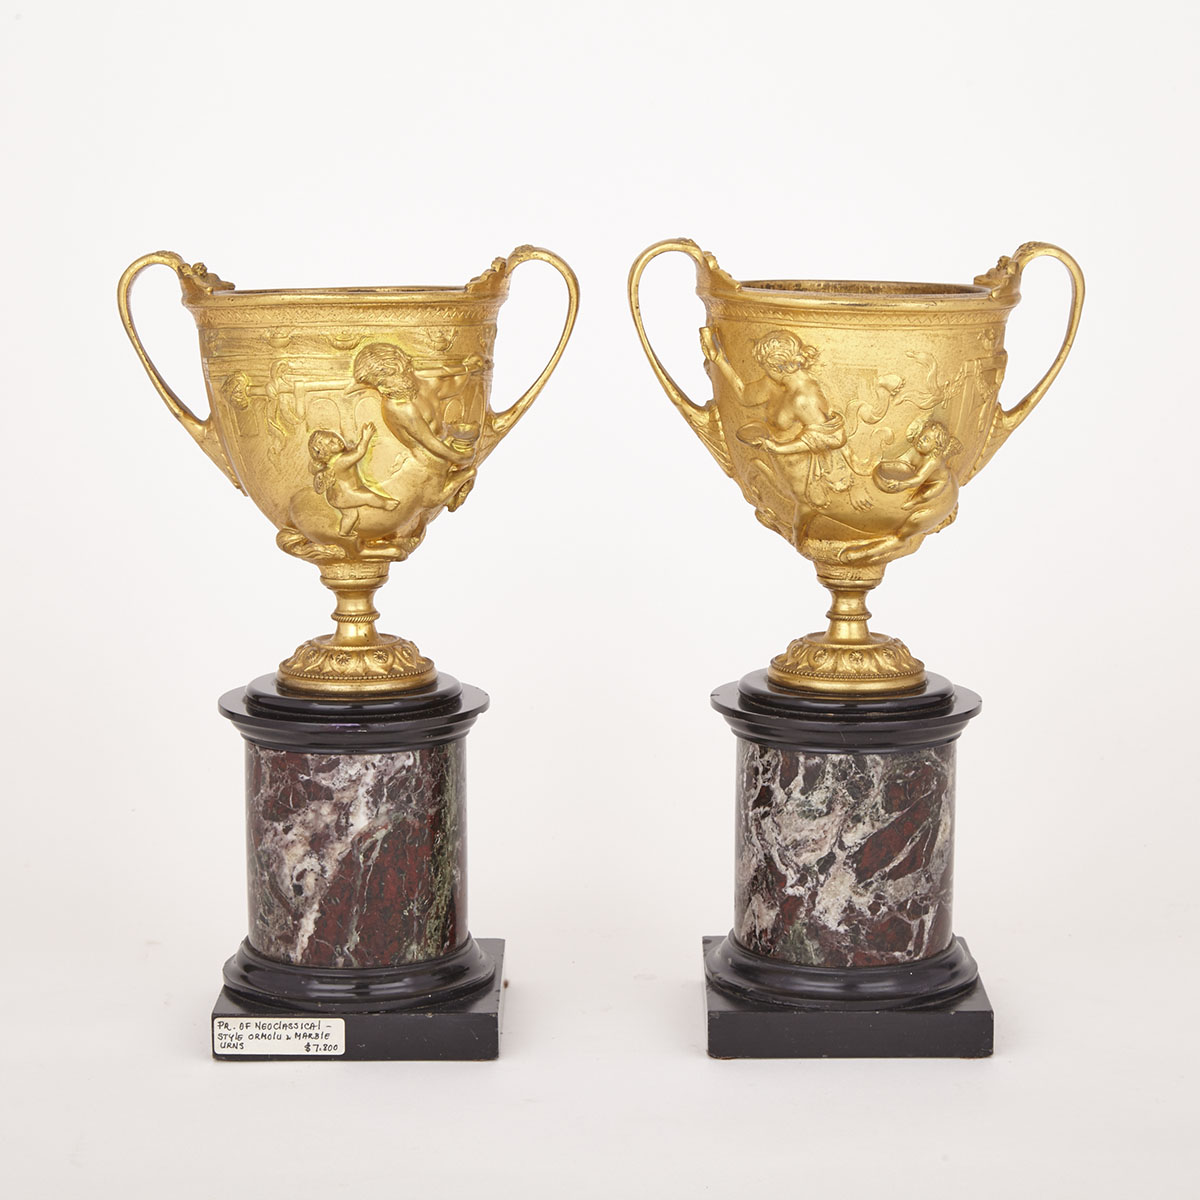 Pair of French Neoclassical Gilt Bronze Mantle Urns, 19th century